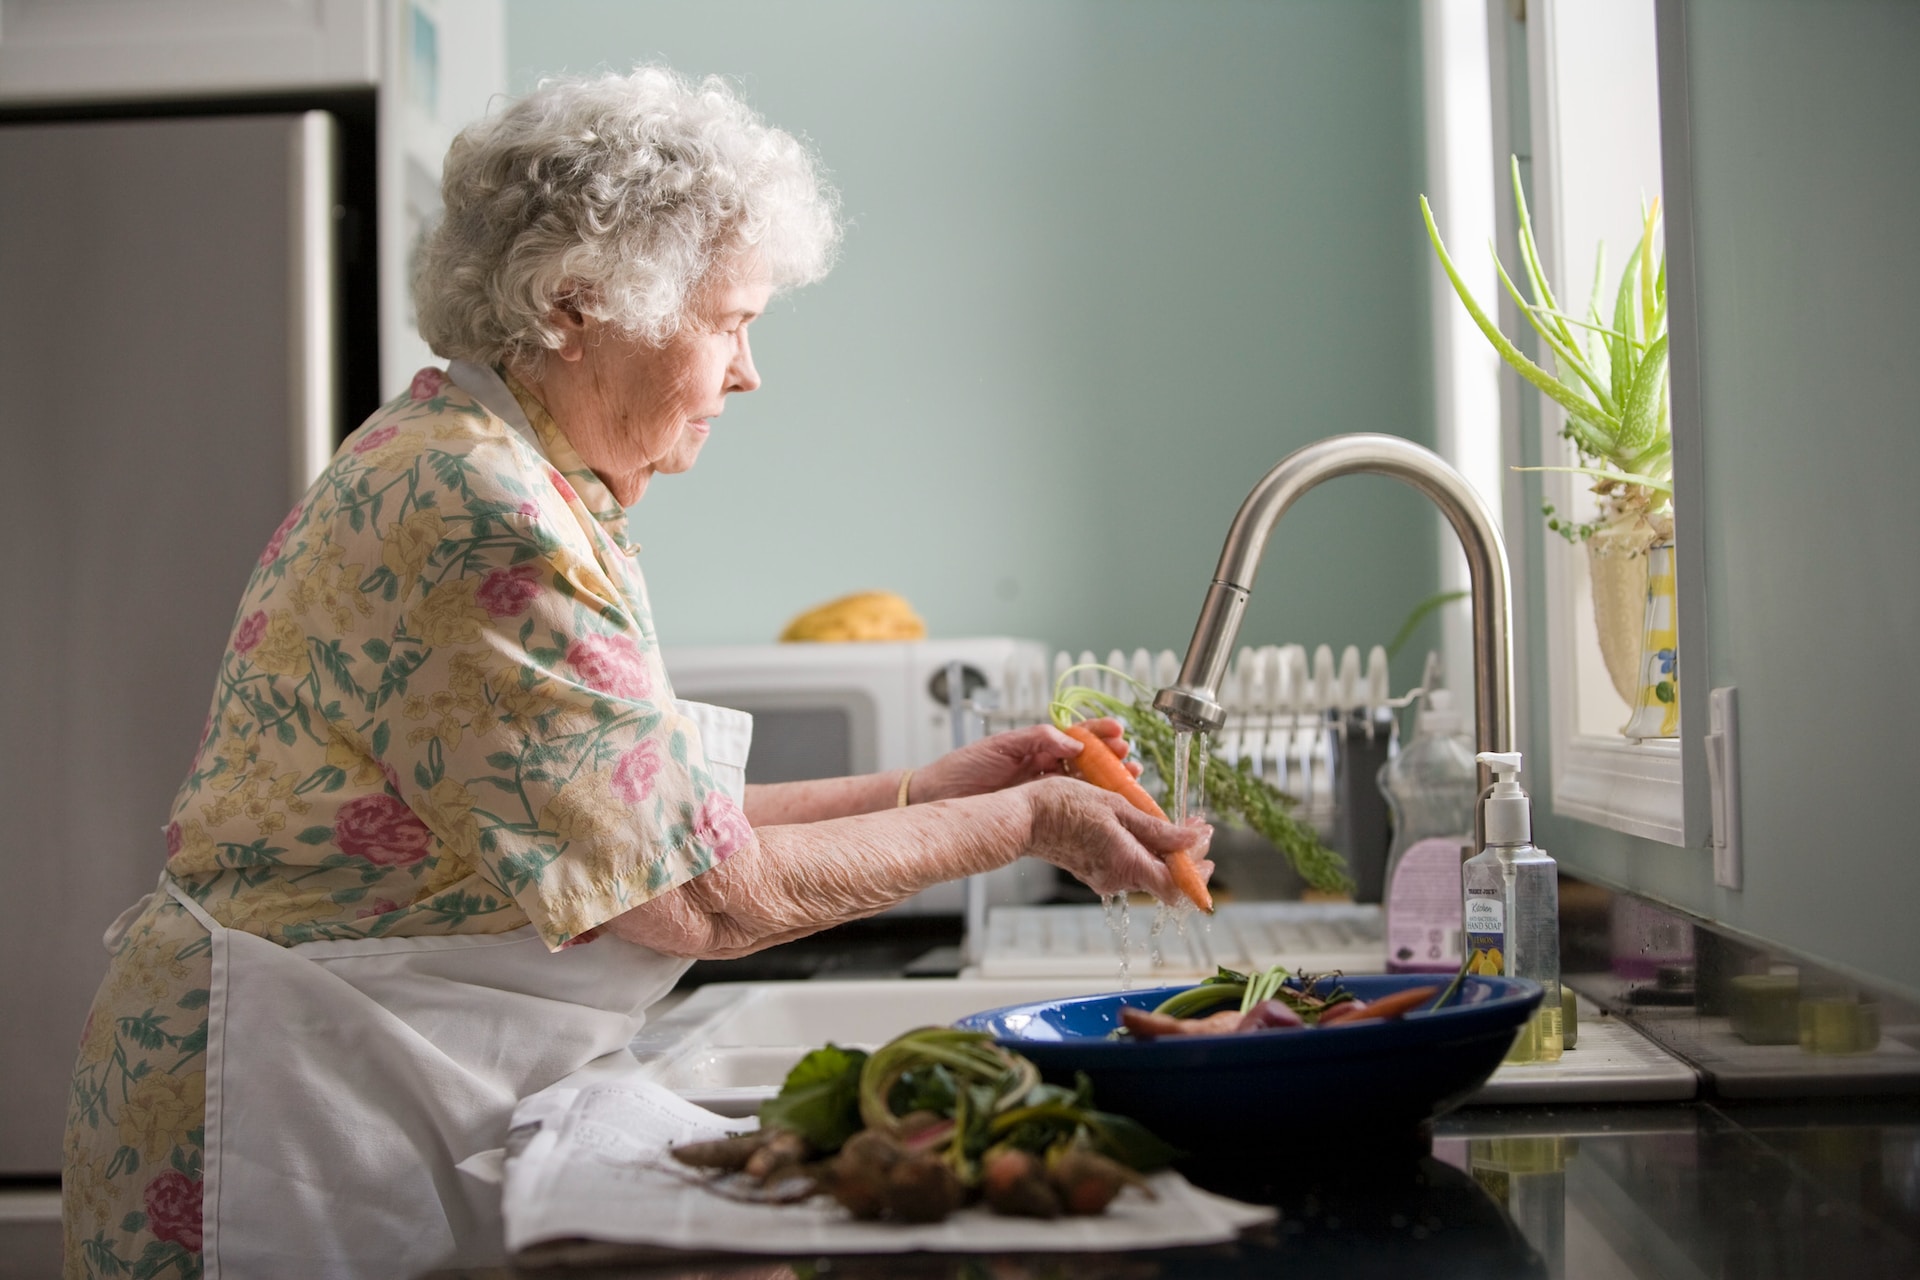 The Home Modifications Your Should Make For Your Aging Loved One